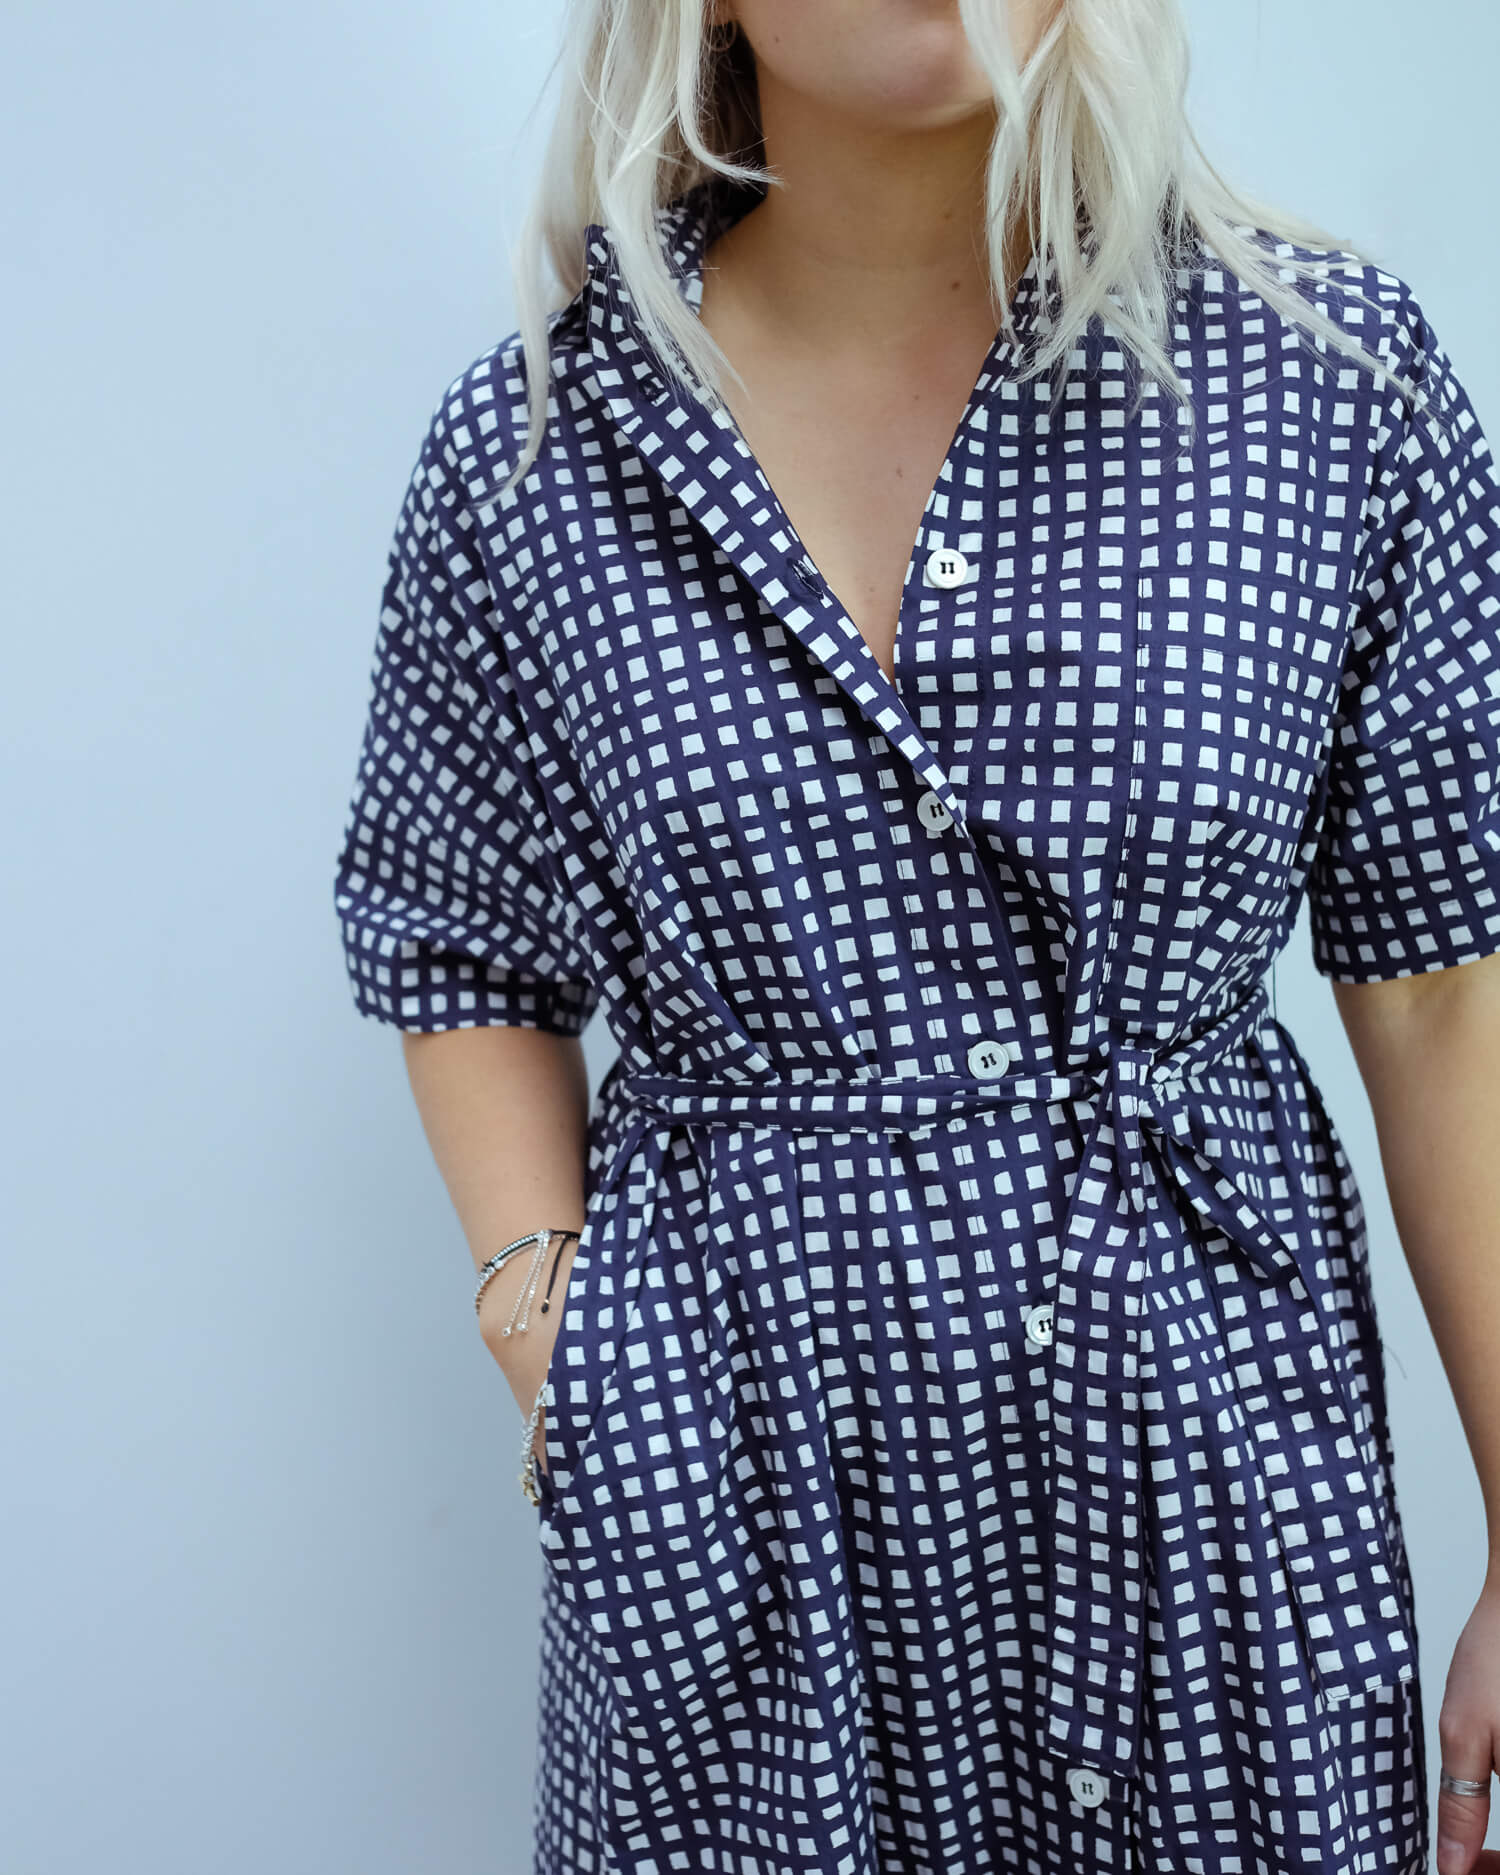 LOR Ni checked dress in navy